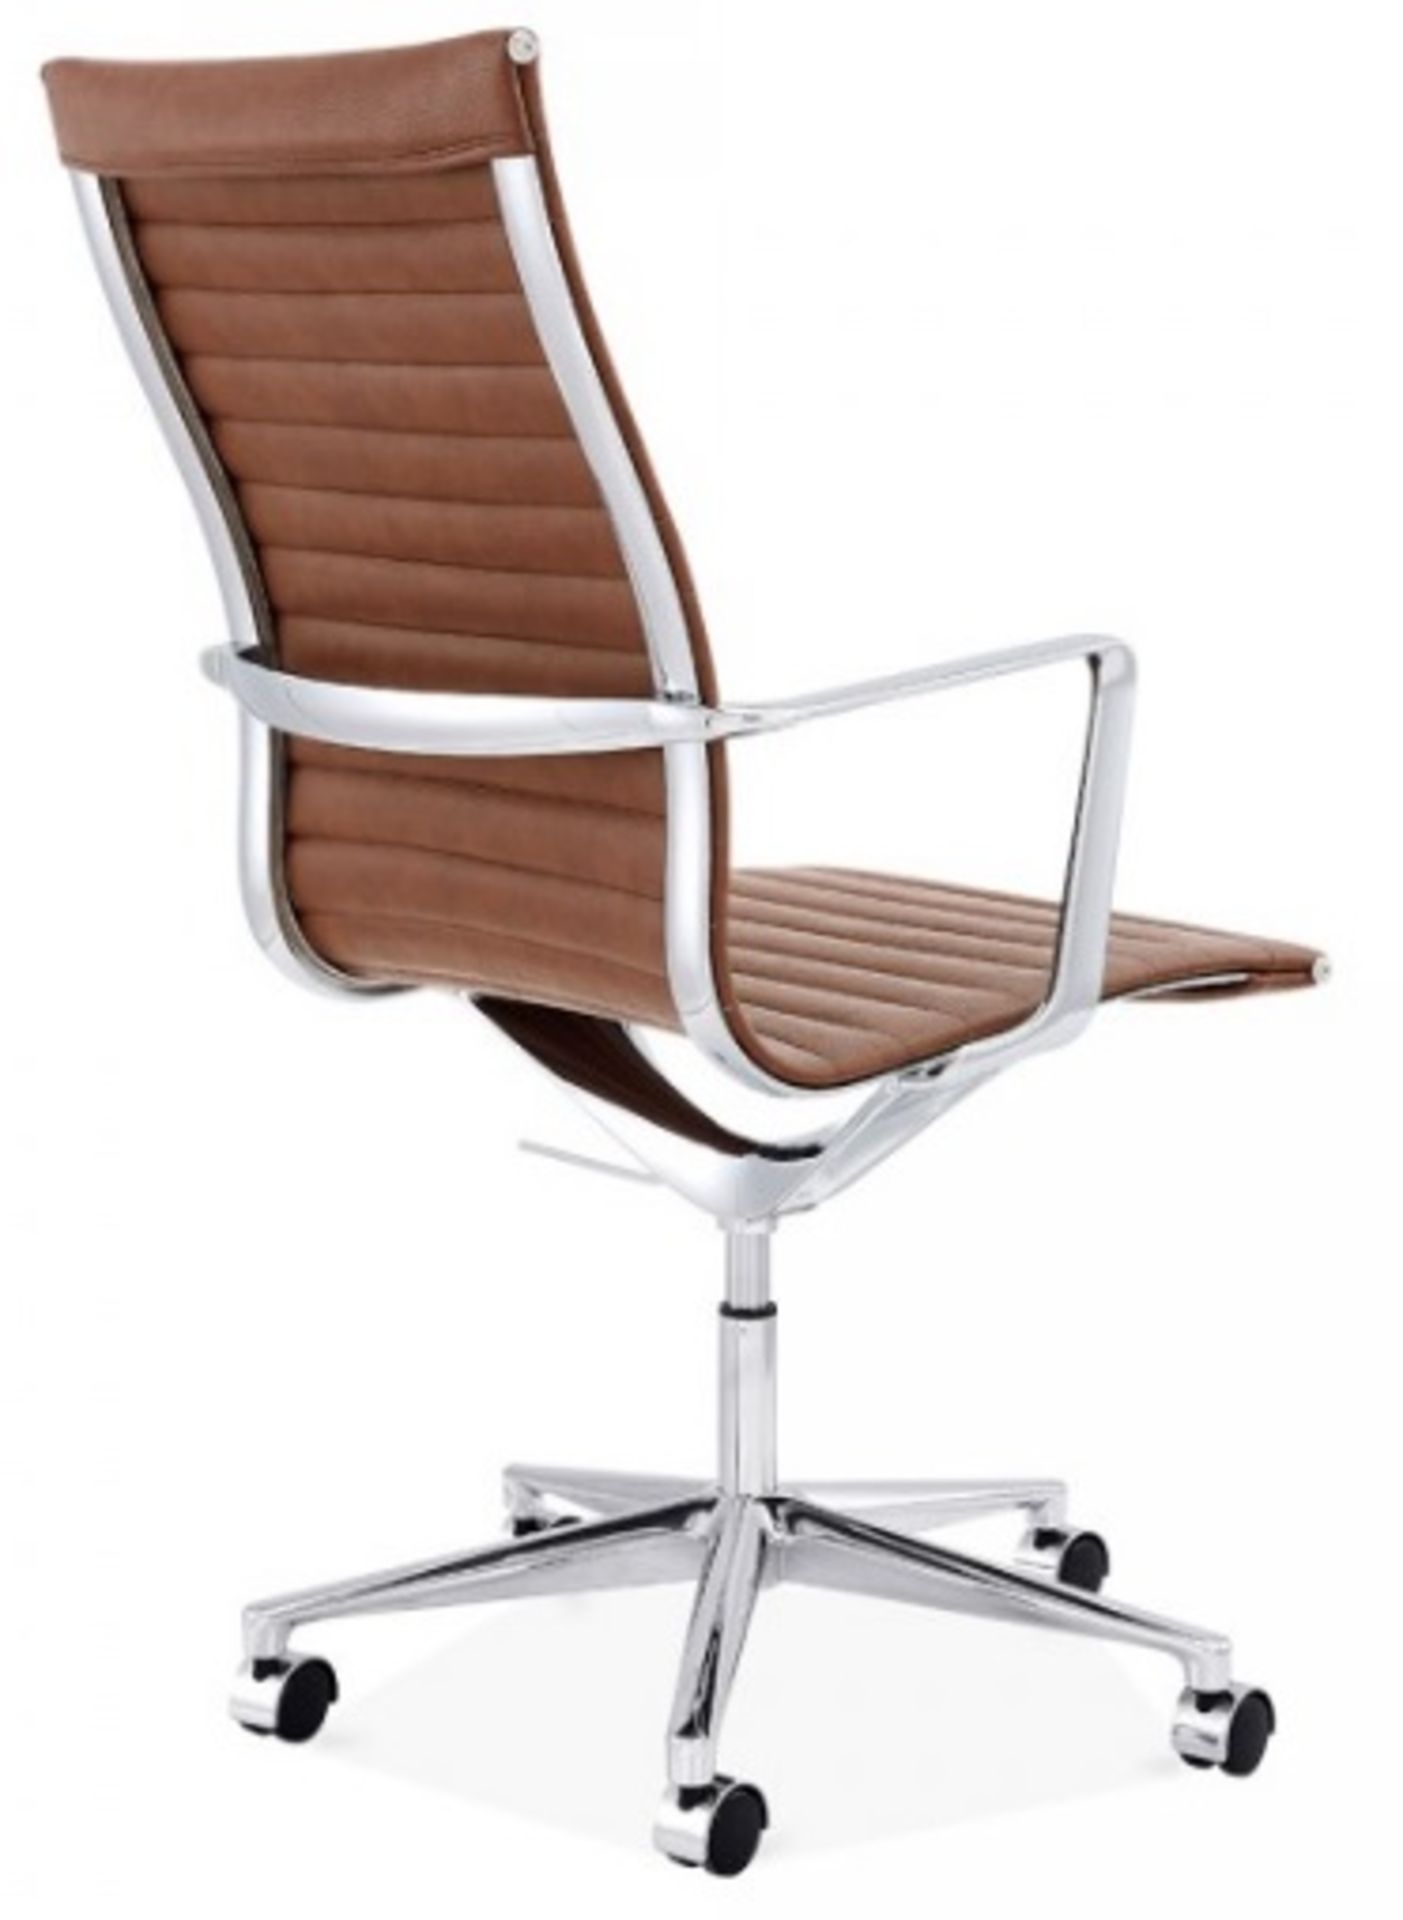 1 x LINEAR Eames-Inspired Ribbed High Back Office Swivel Chair In Brown Leather- New / Unboxed Stock - Bild 4 aus 5